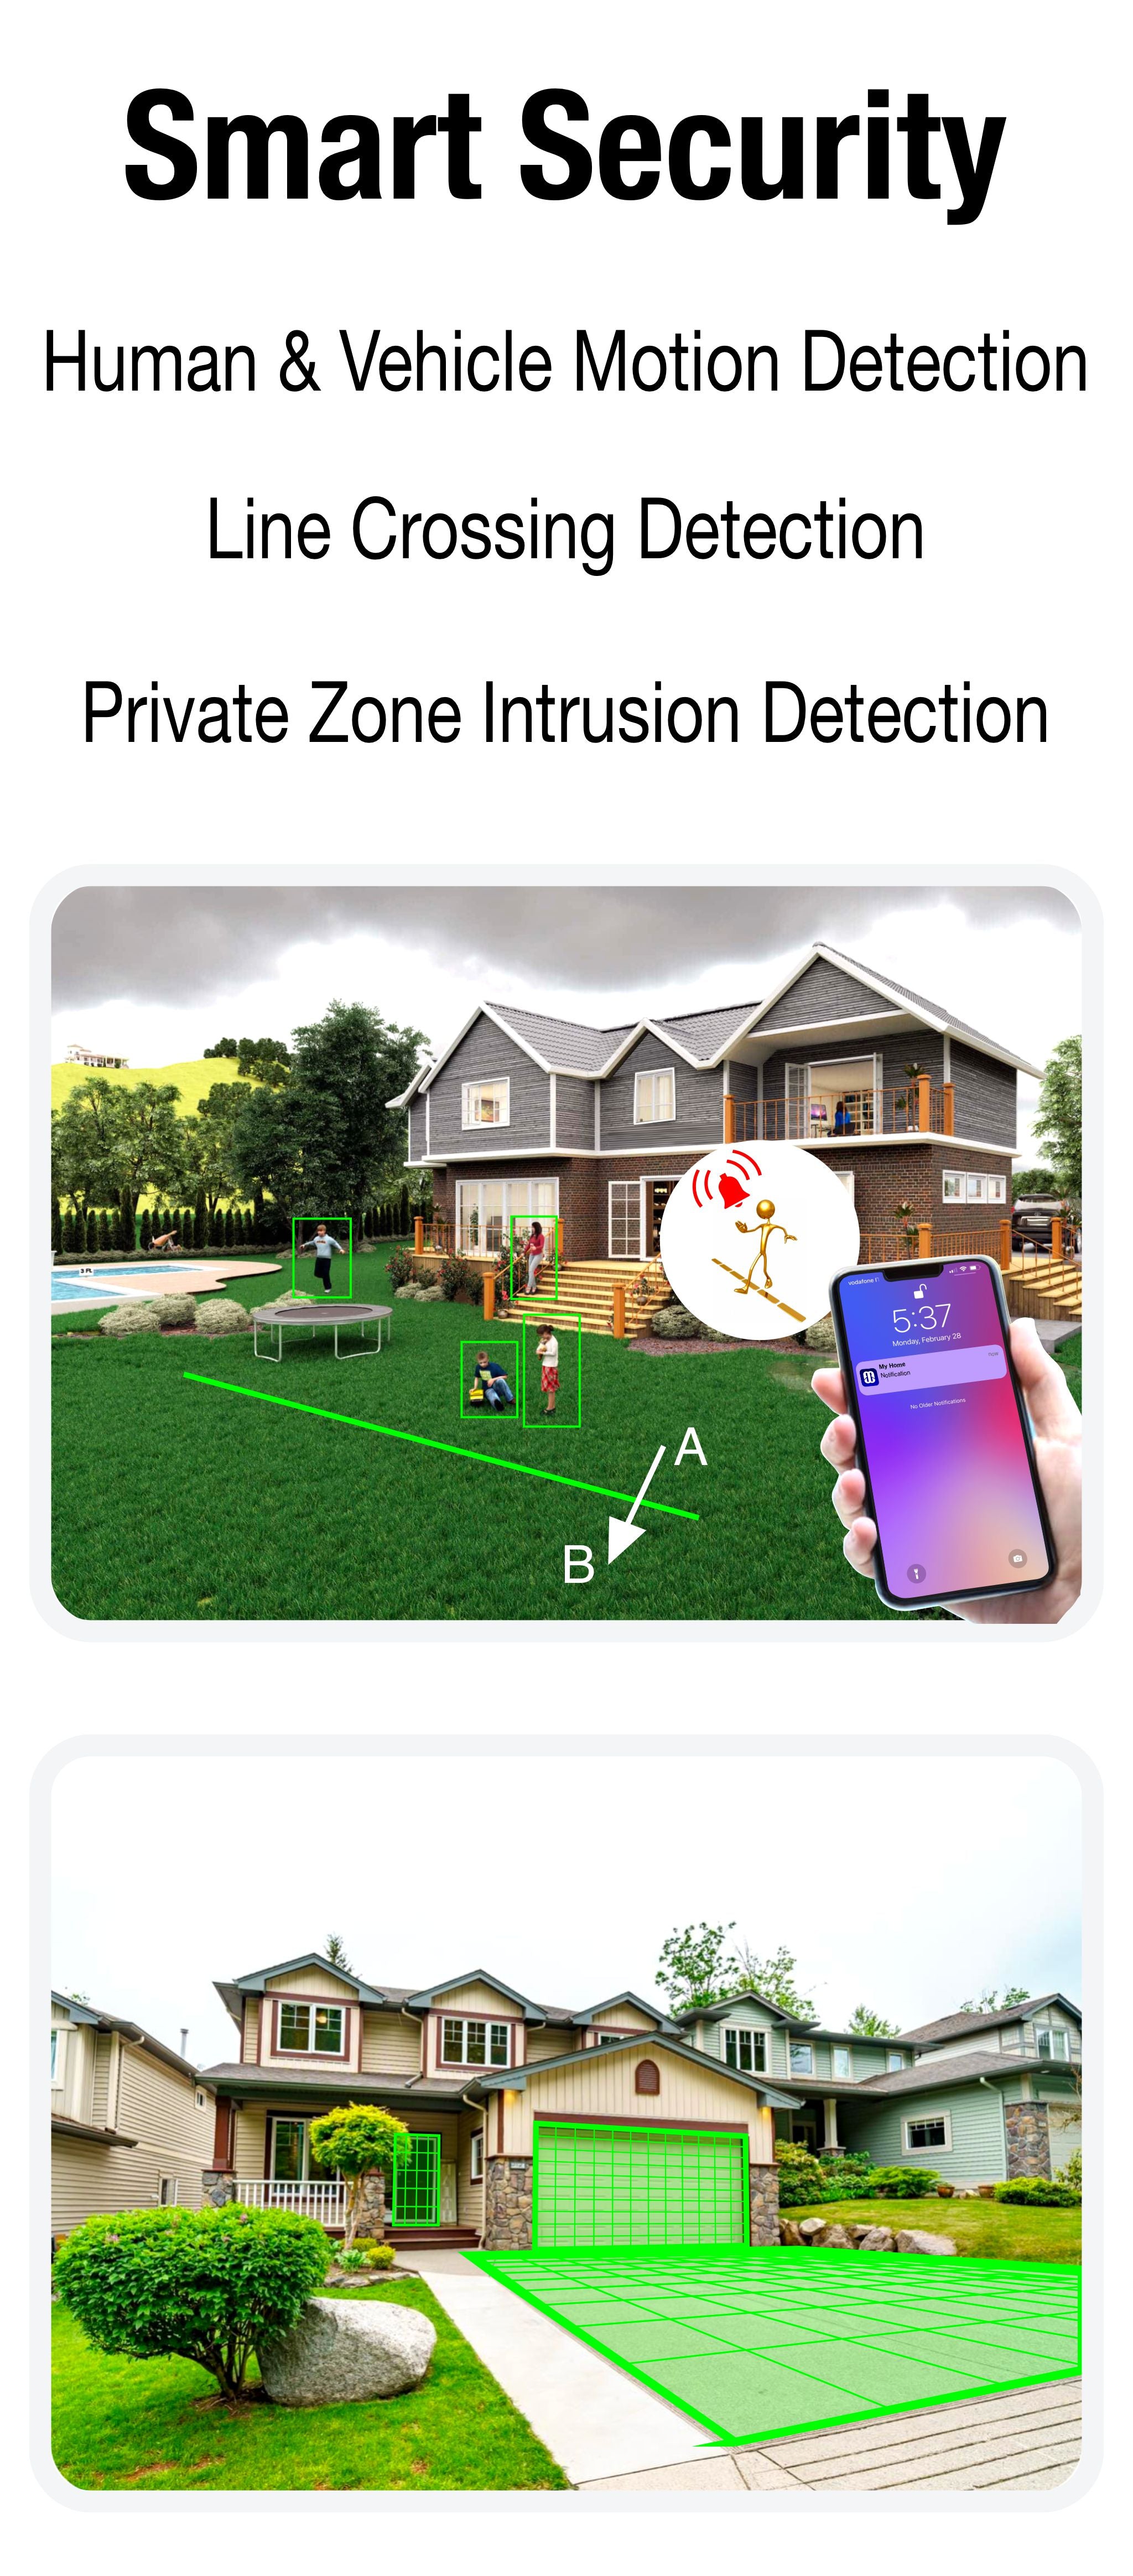 Smart Home Security Camera System with Human and Vehicle Motion Detection and Line Crossing Detection